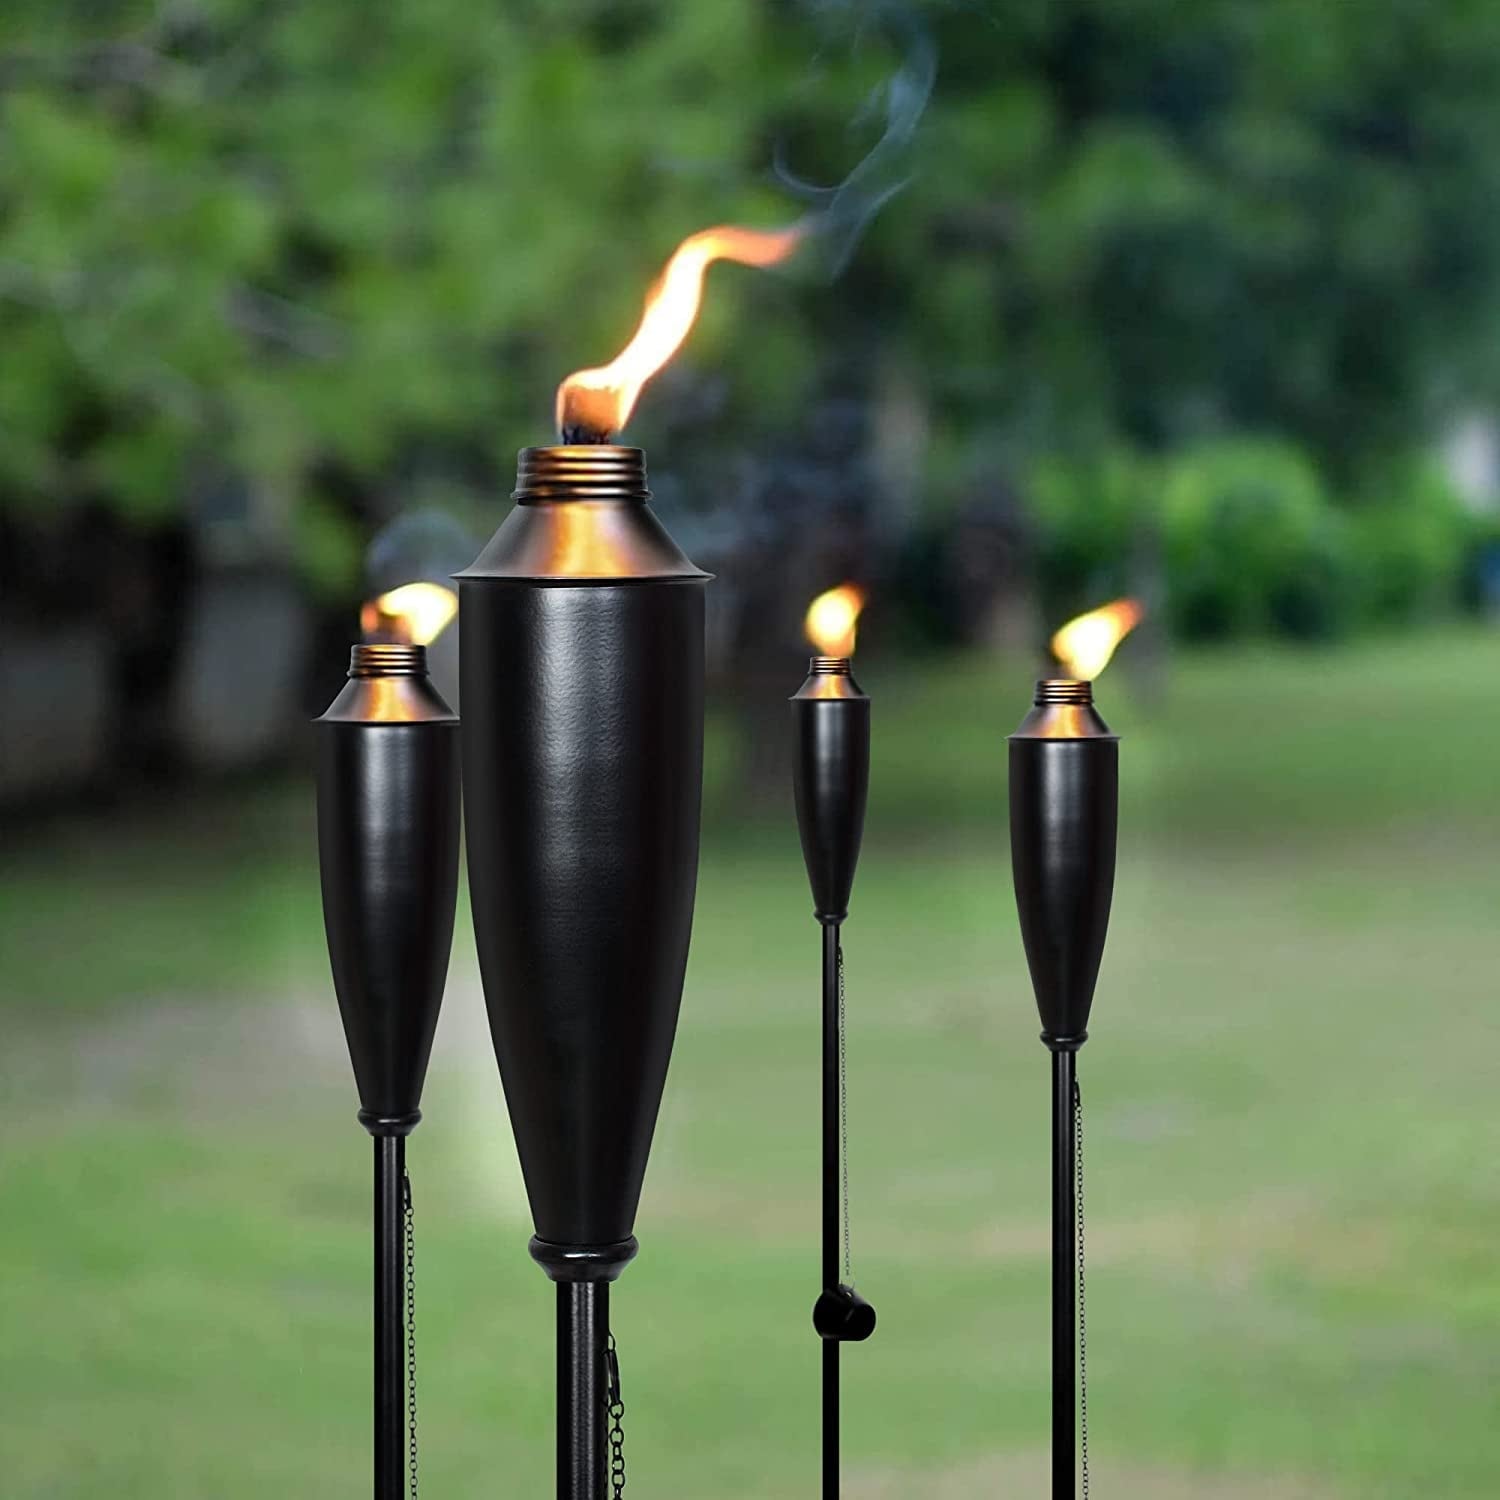 https://ak1.ostkcdn.com/images/products/is/images/direct/d5b985ba4117f743c20347f539927d9a3ba51fe6/Deco-Home-Set-of-4-Garden-Tiki-Torch-Citronella-Metal-Outdoor-Torch---60inch.jpg